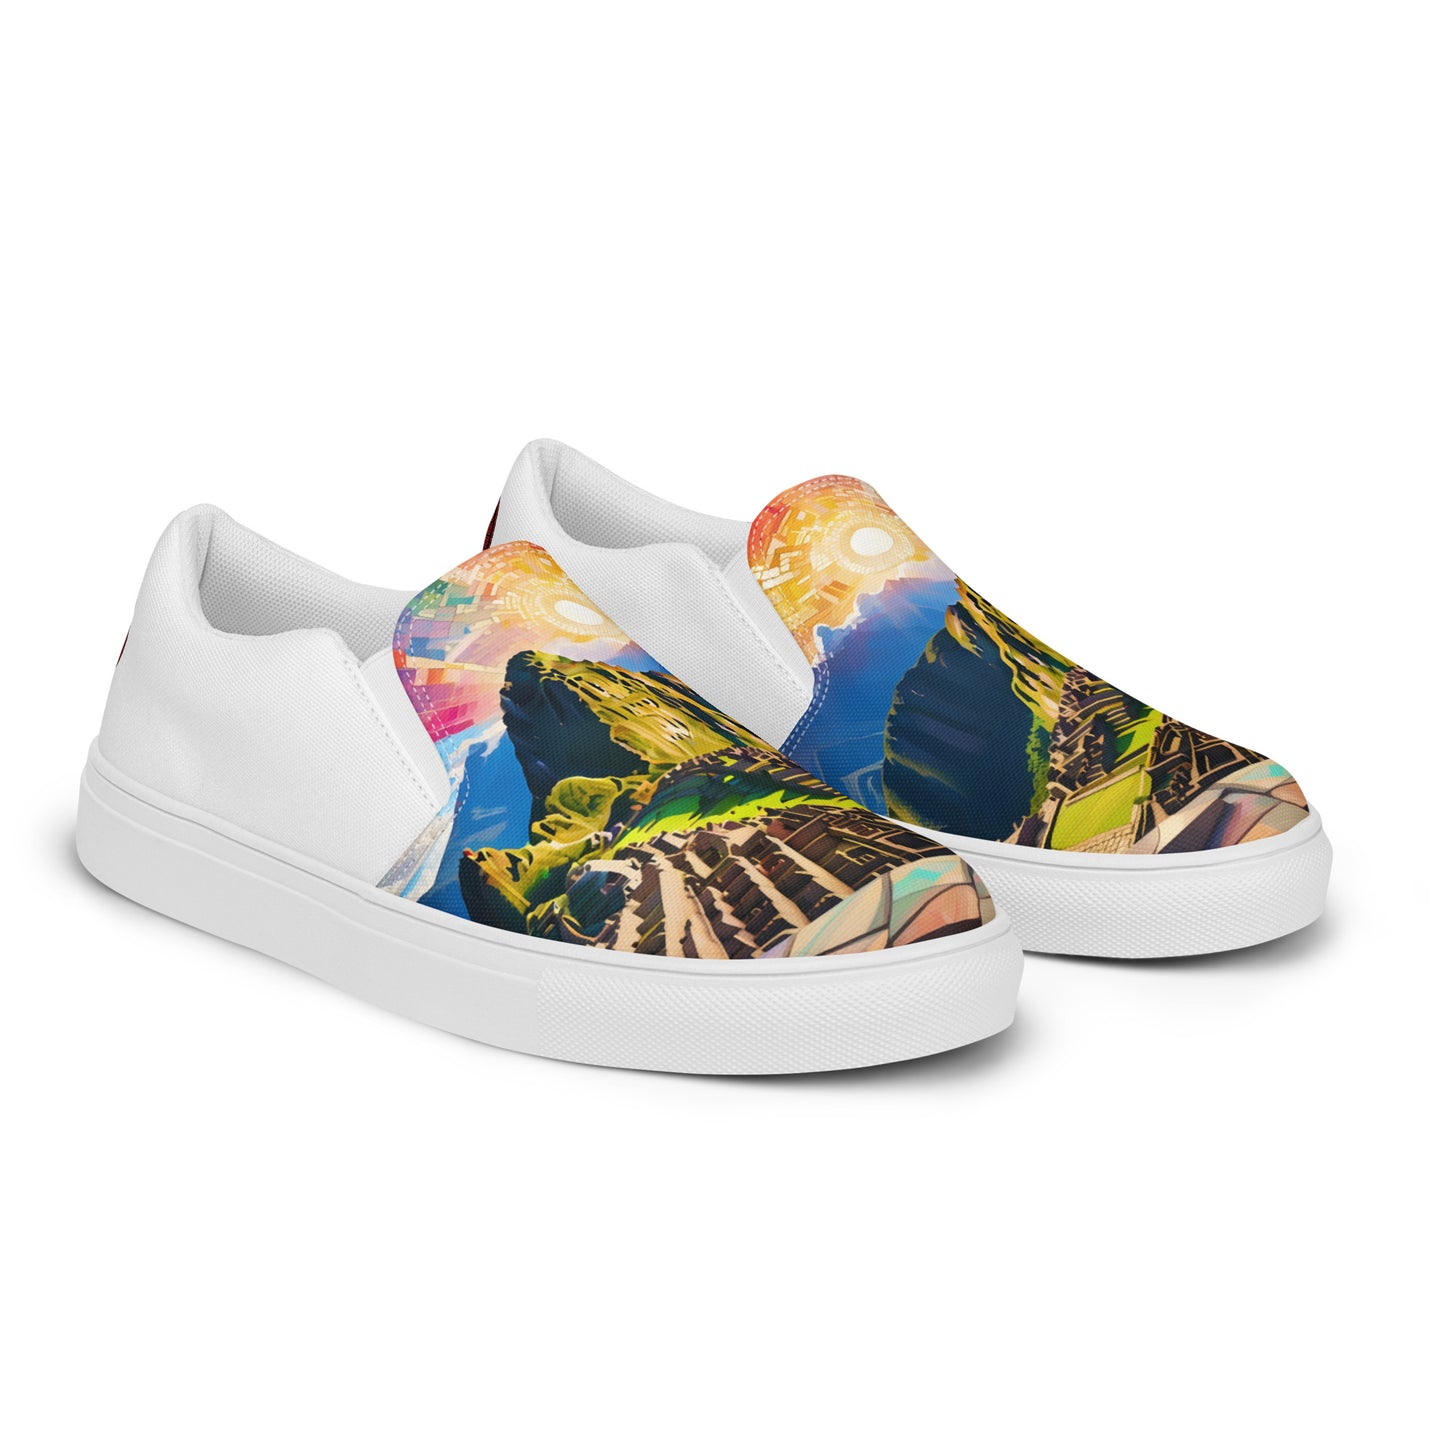 Machu Picchu - Stained glass - Women - White Slip-on shoes